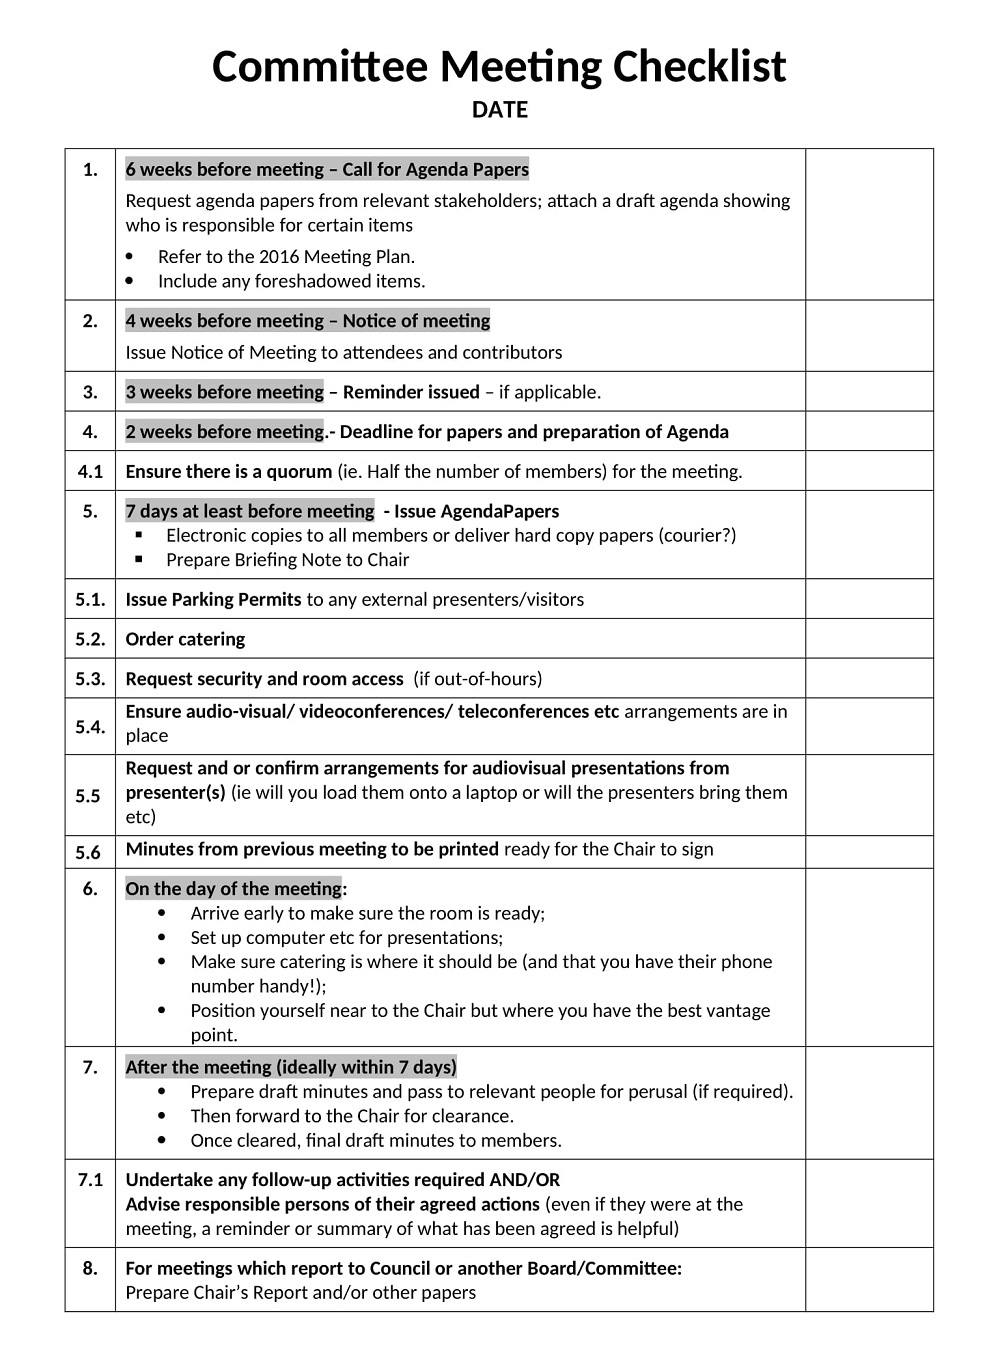 Committee Meeting Checklist Template